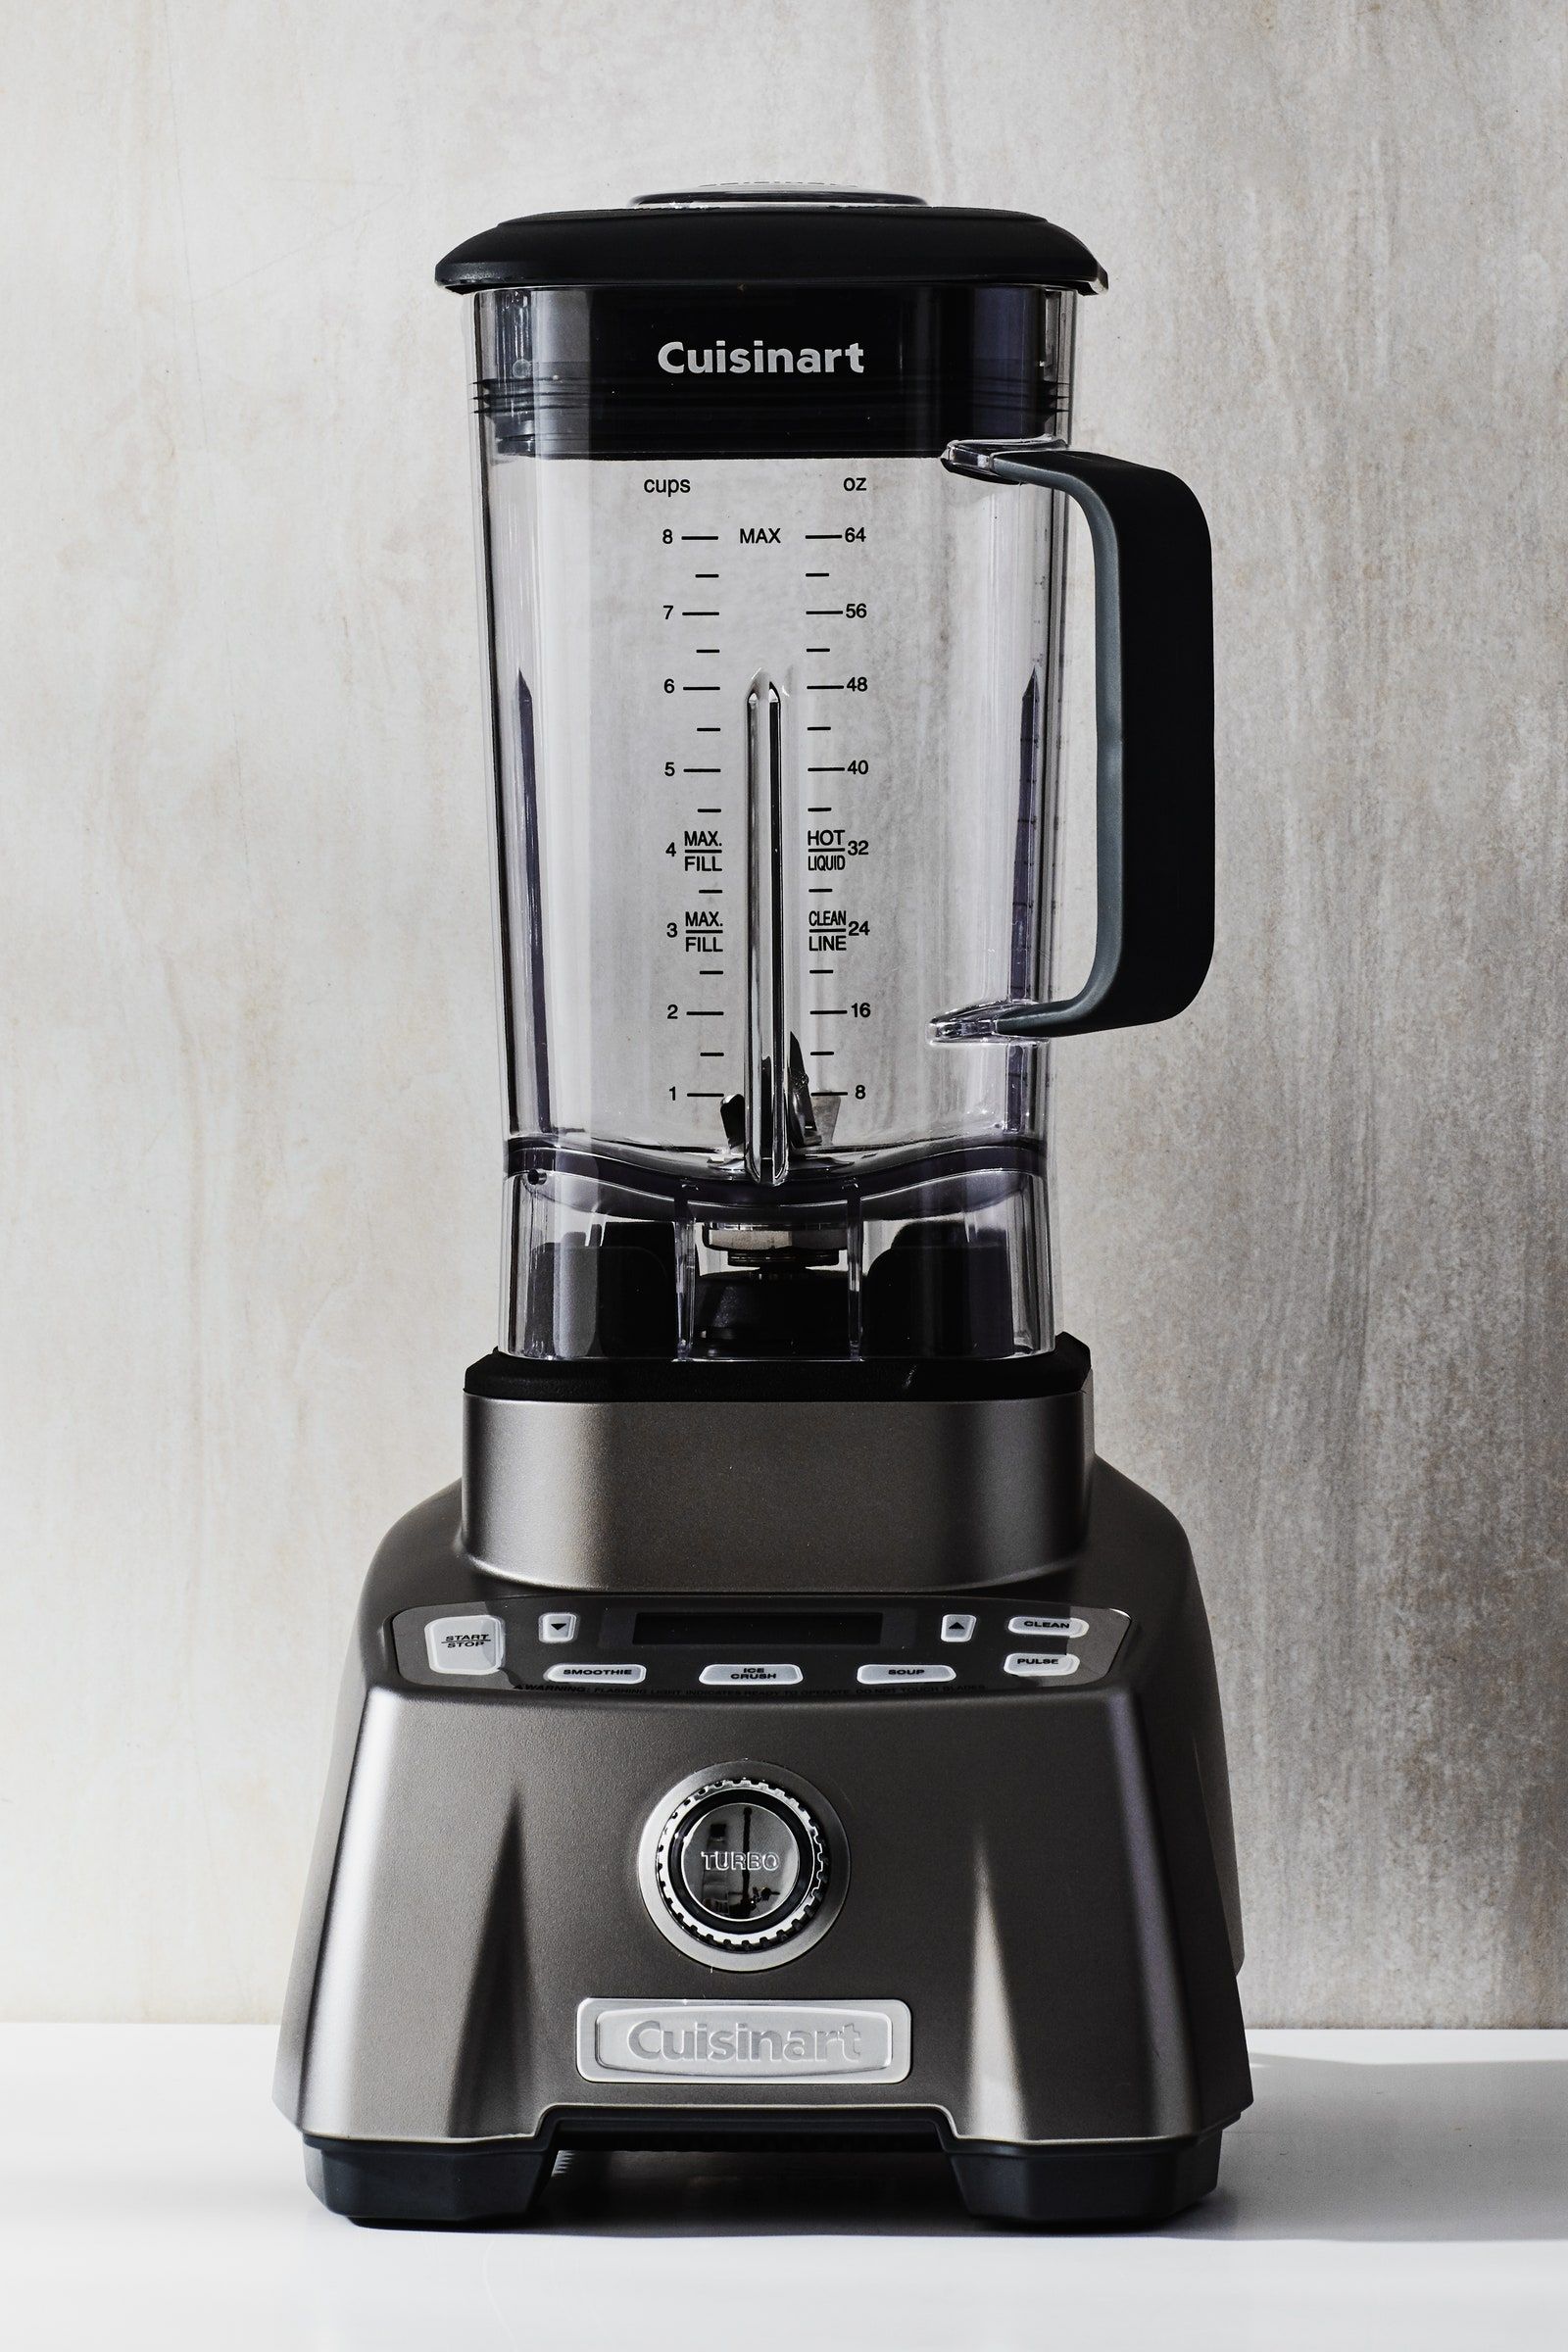 The Best Blender for Smoothies, Soups, and Yes, Homemade Peanut Butter, Tested and Reviewed